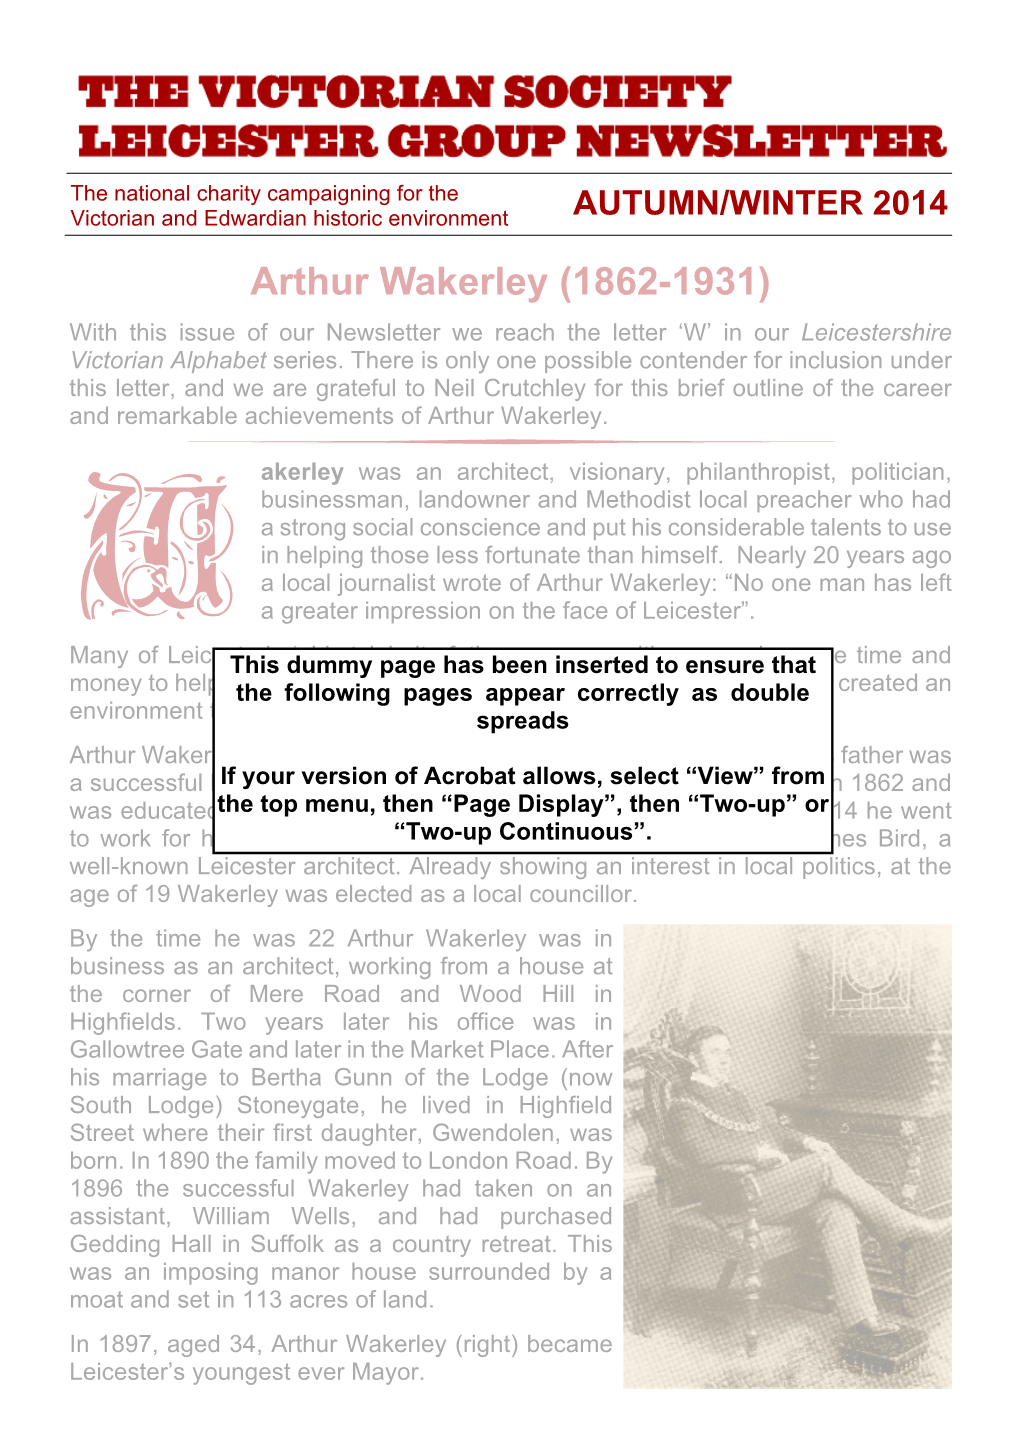 Arthur Wakerley (1862-1931) with This Issue of Our Newsletter We Reach the Letter ‘W’ in Our Leicestershire Victorian Alphabet Series